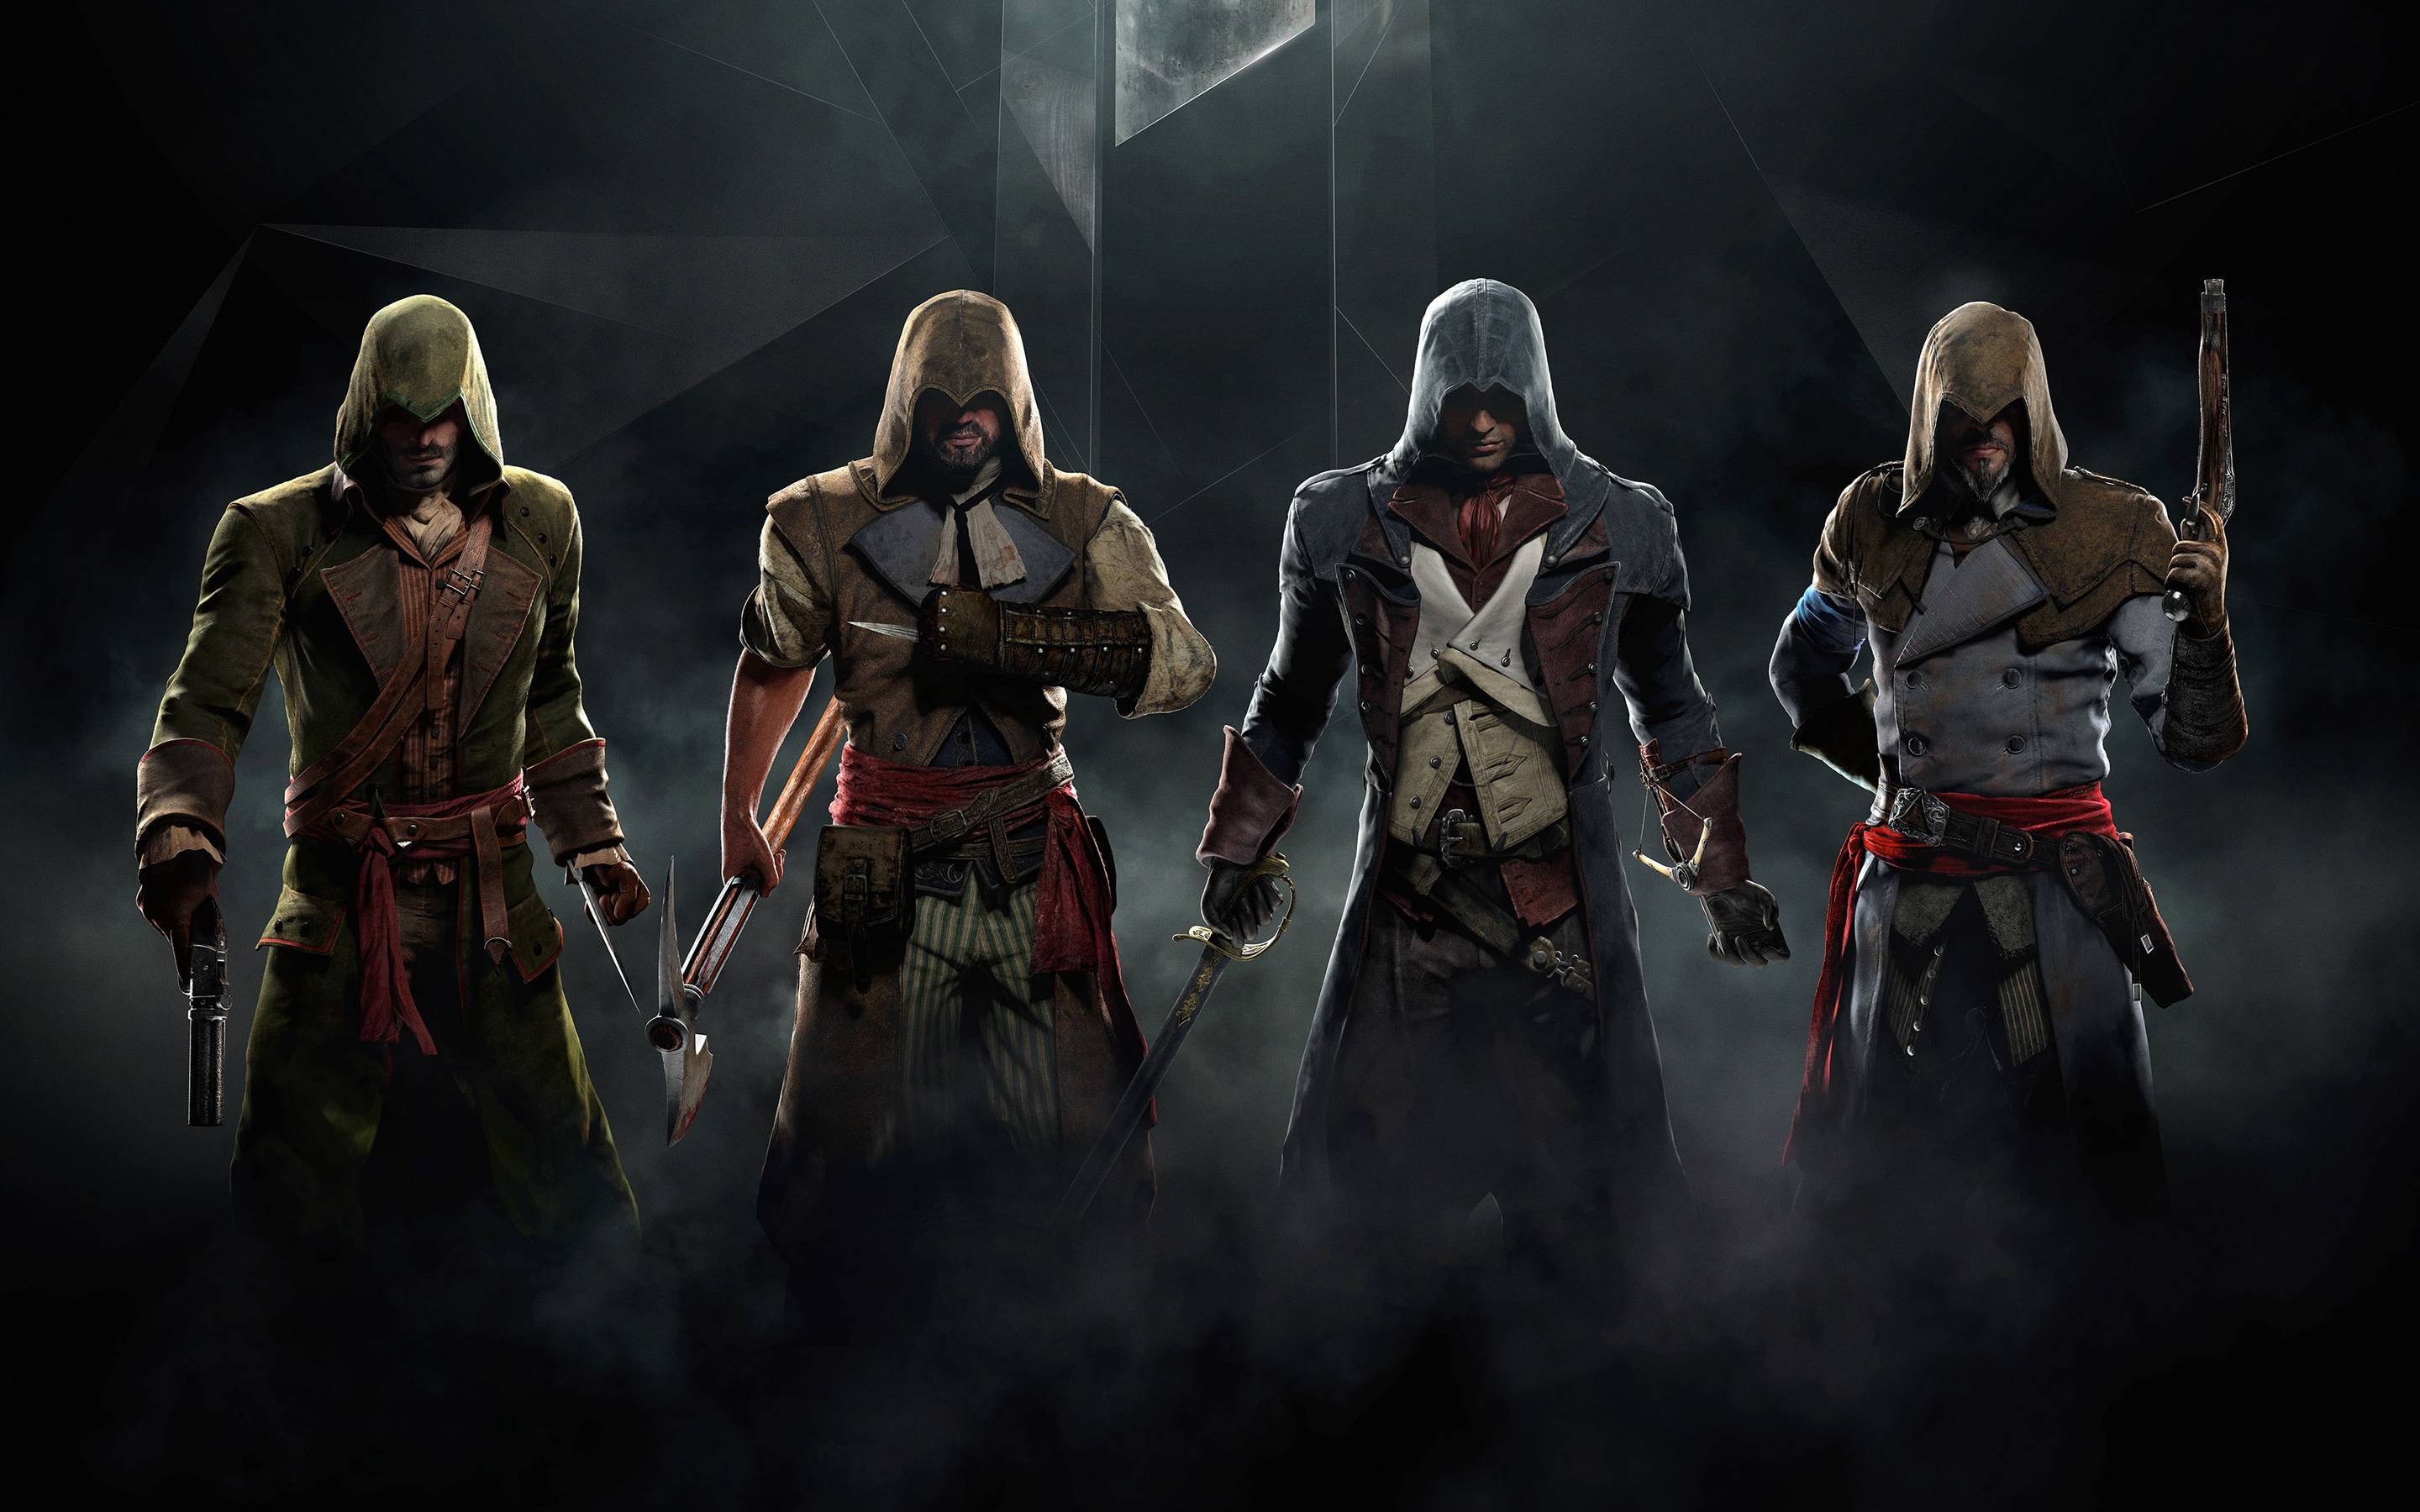 Assassin&;s Creed Unity Game Exclusive HD Wallpaper #